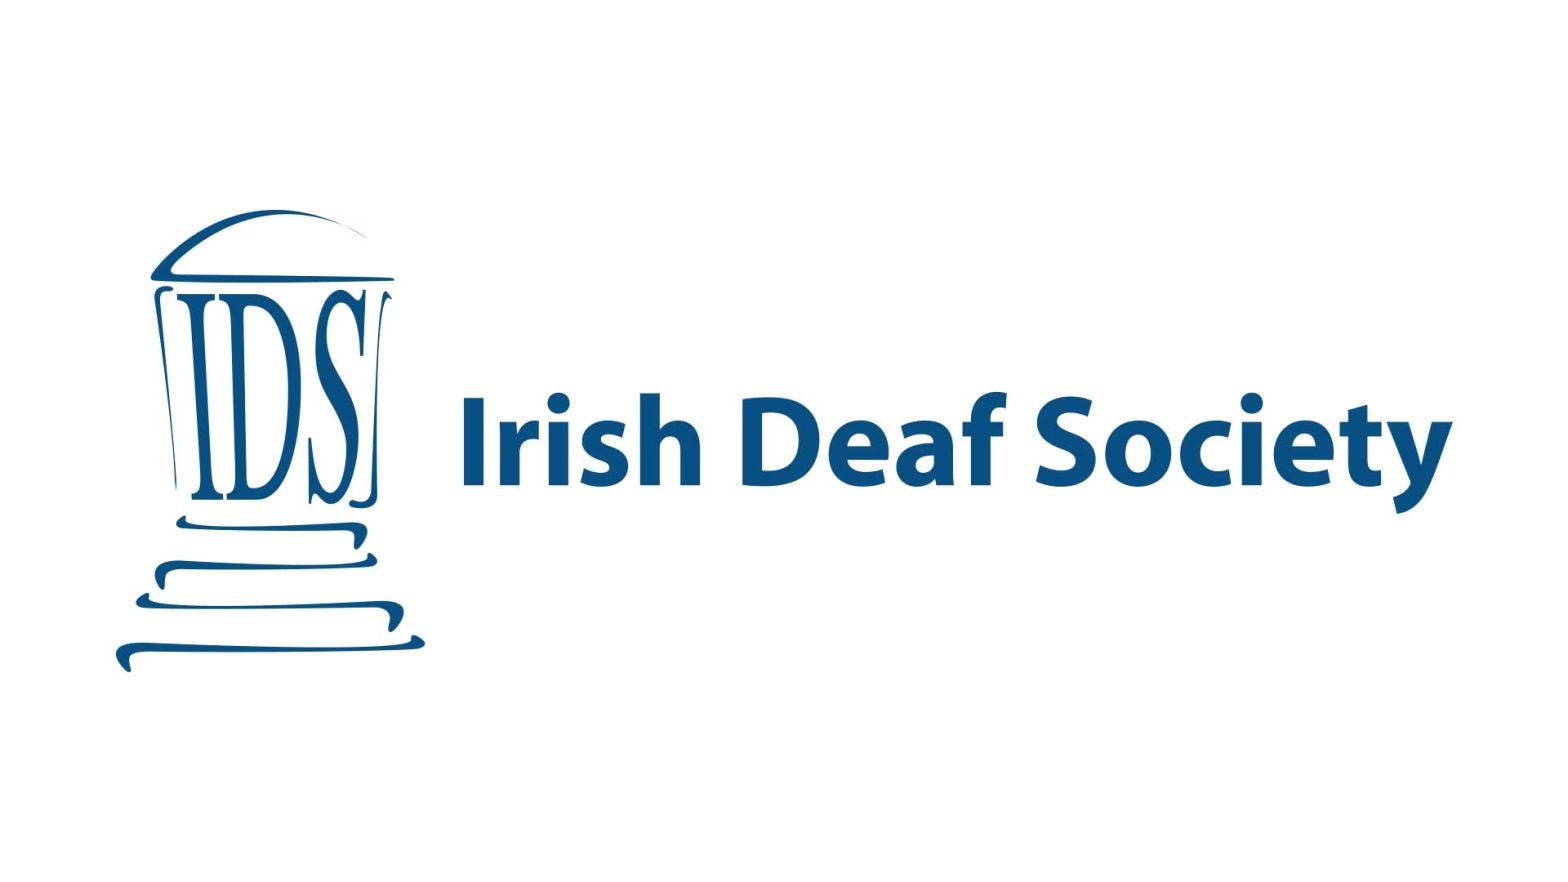 Our 2023 Charity – The Irish Deaf Society